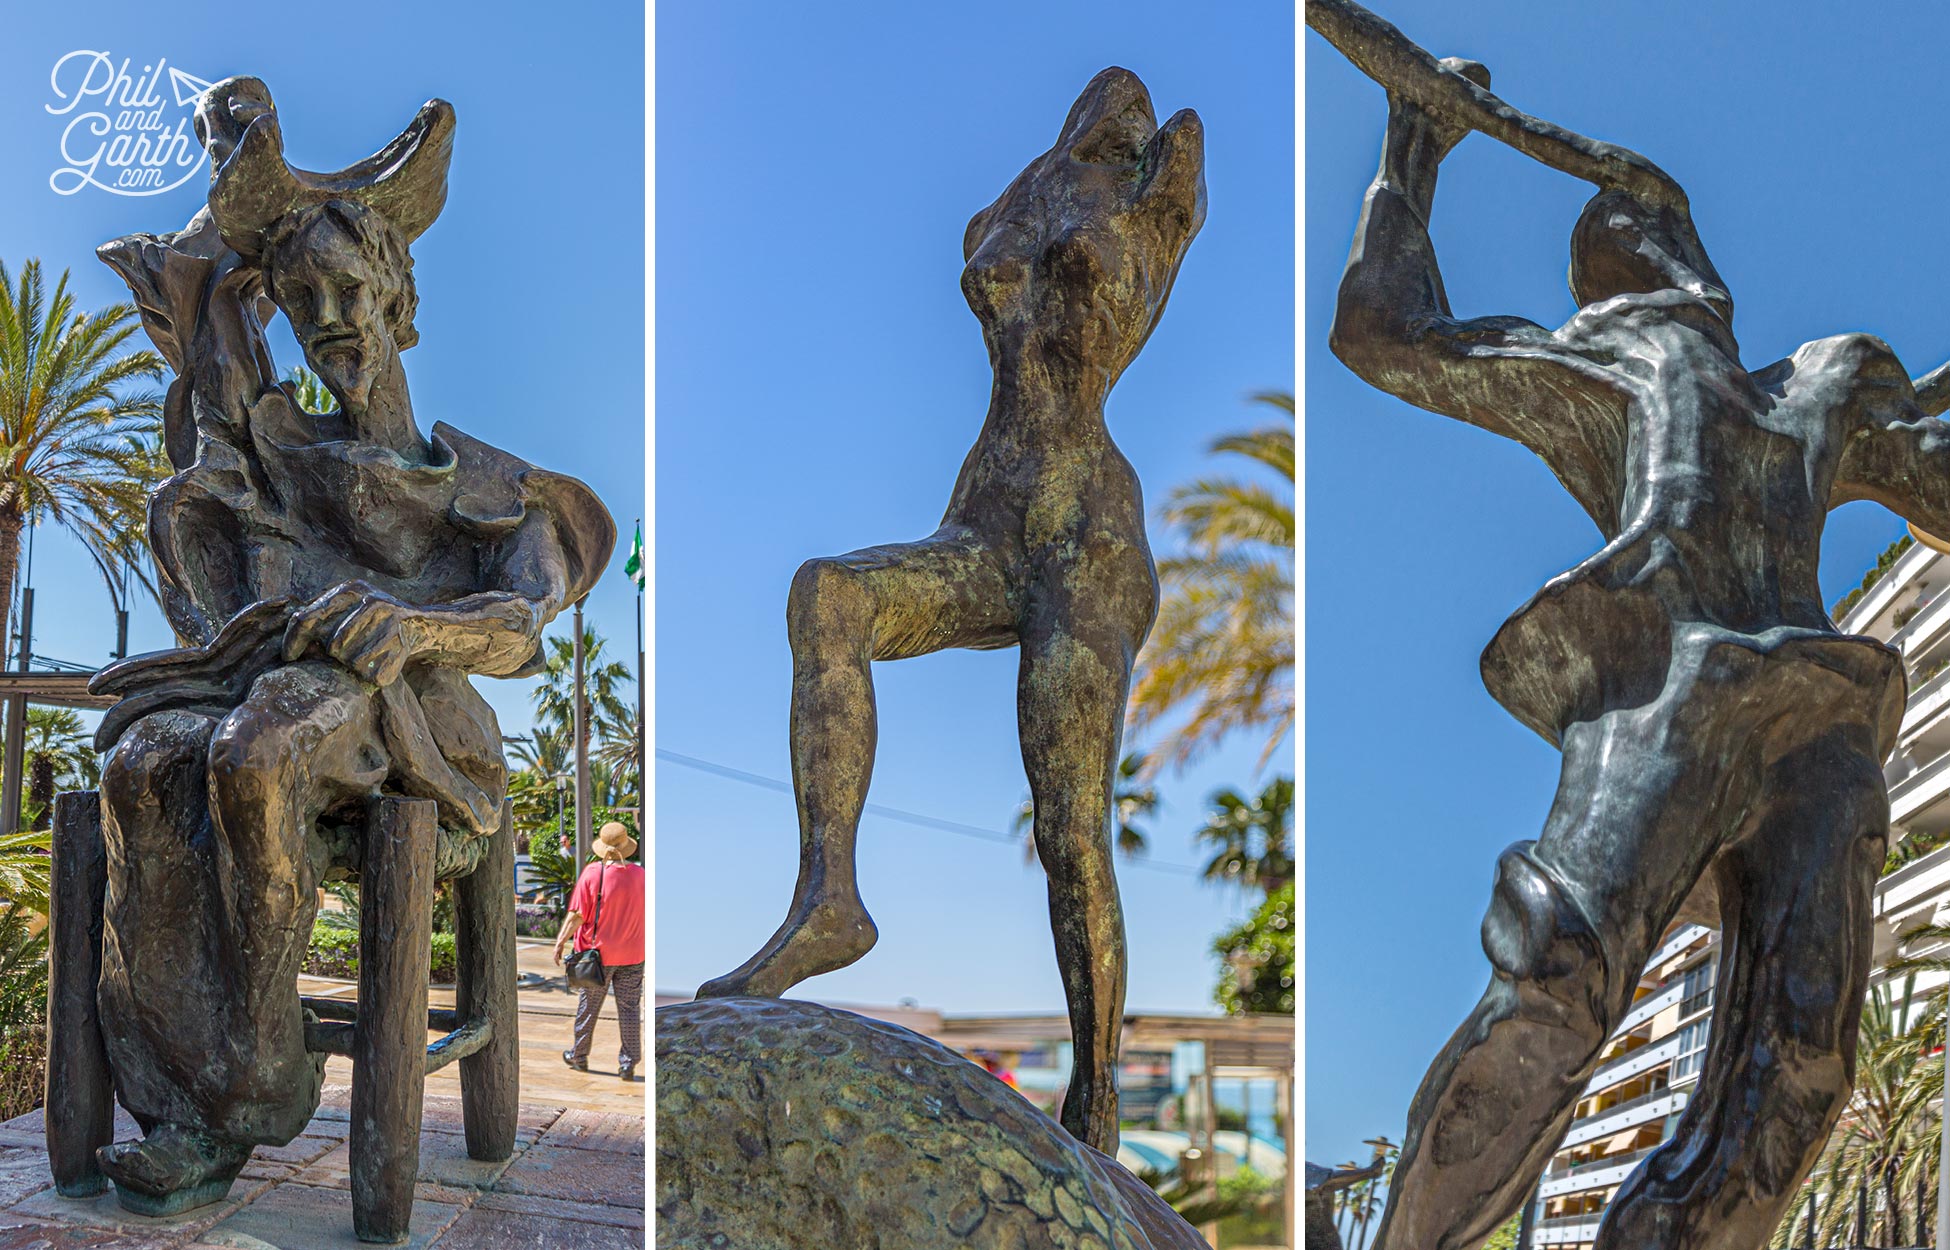 Avenida del Mar offers a rare opportunity to see so many Dalí sculptures in one place